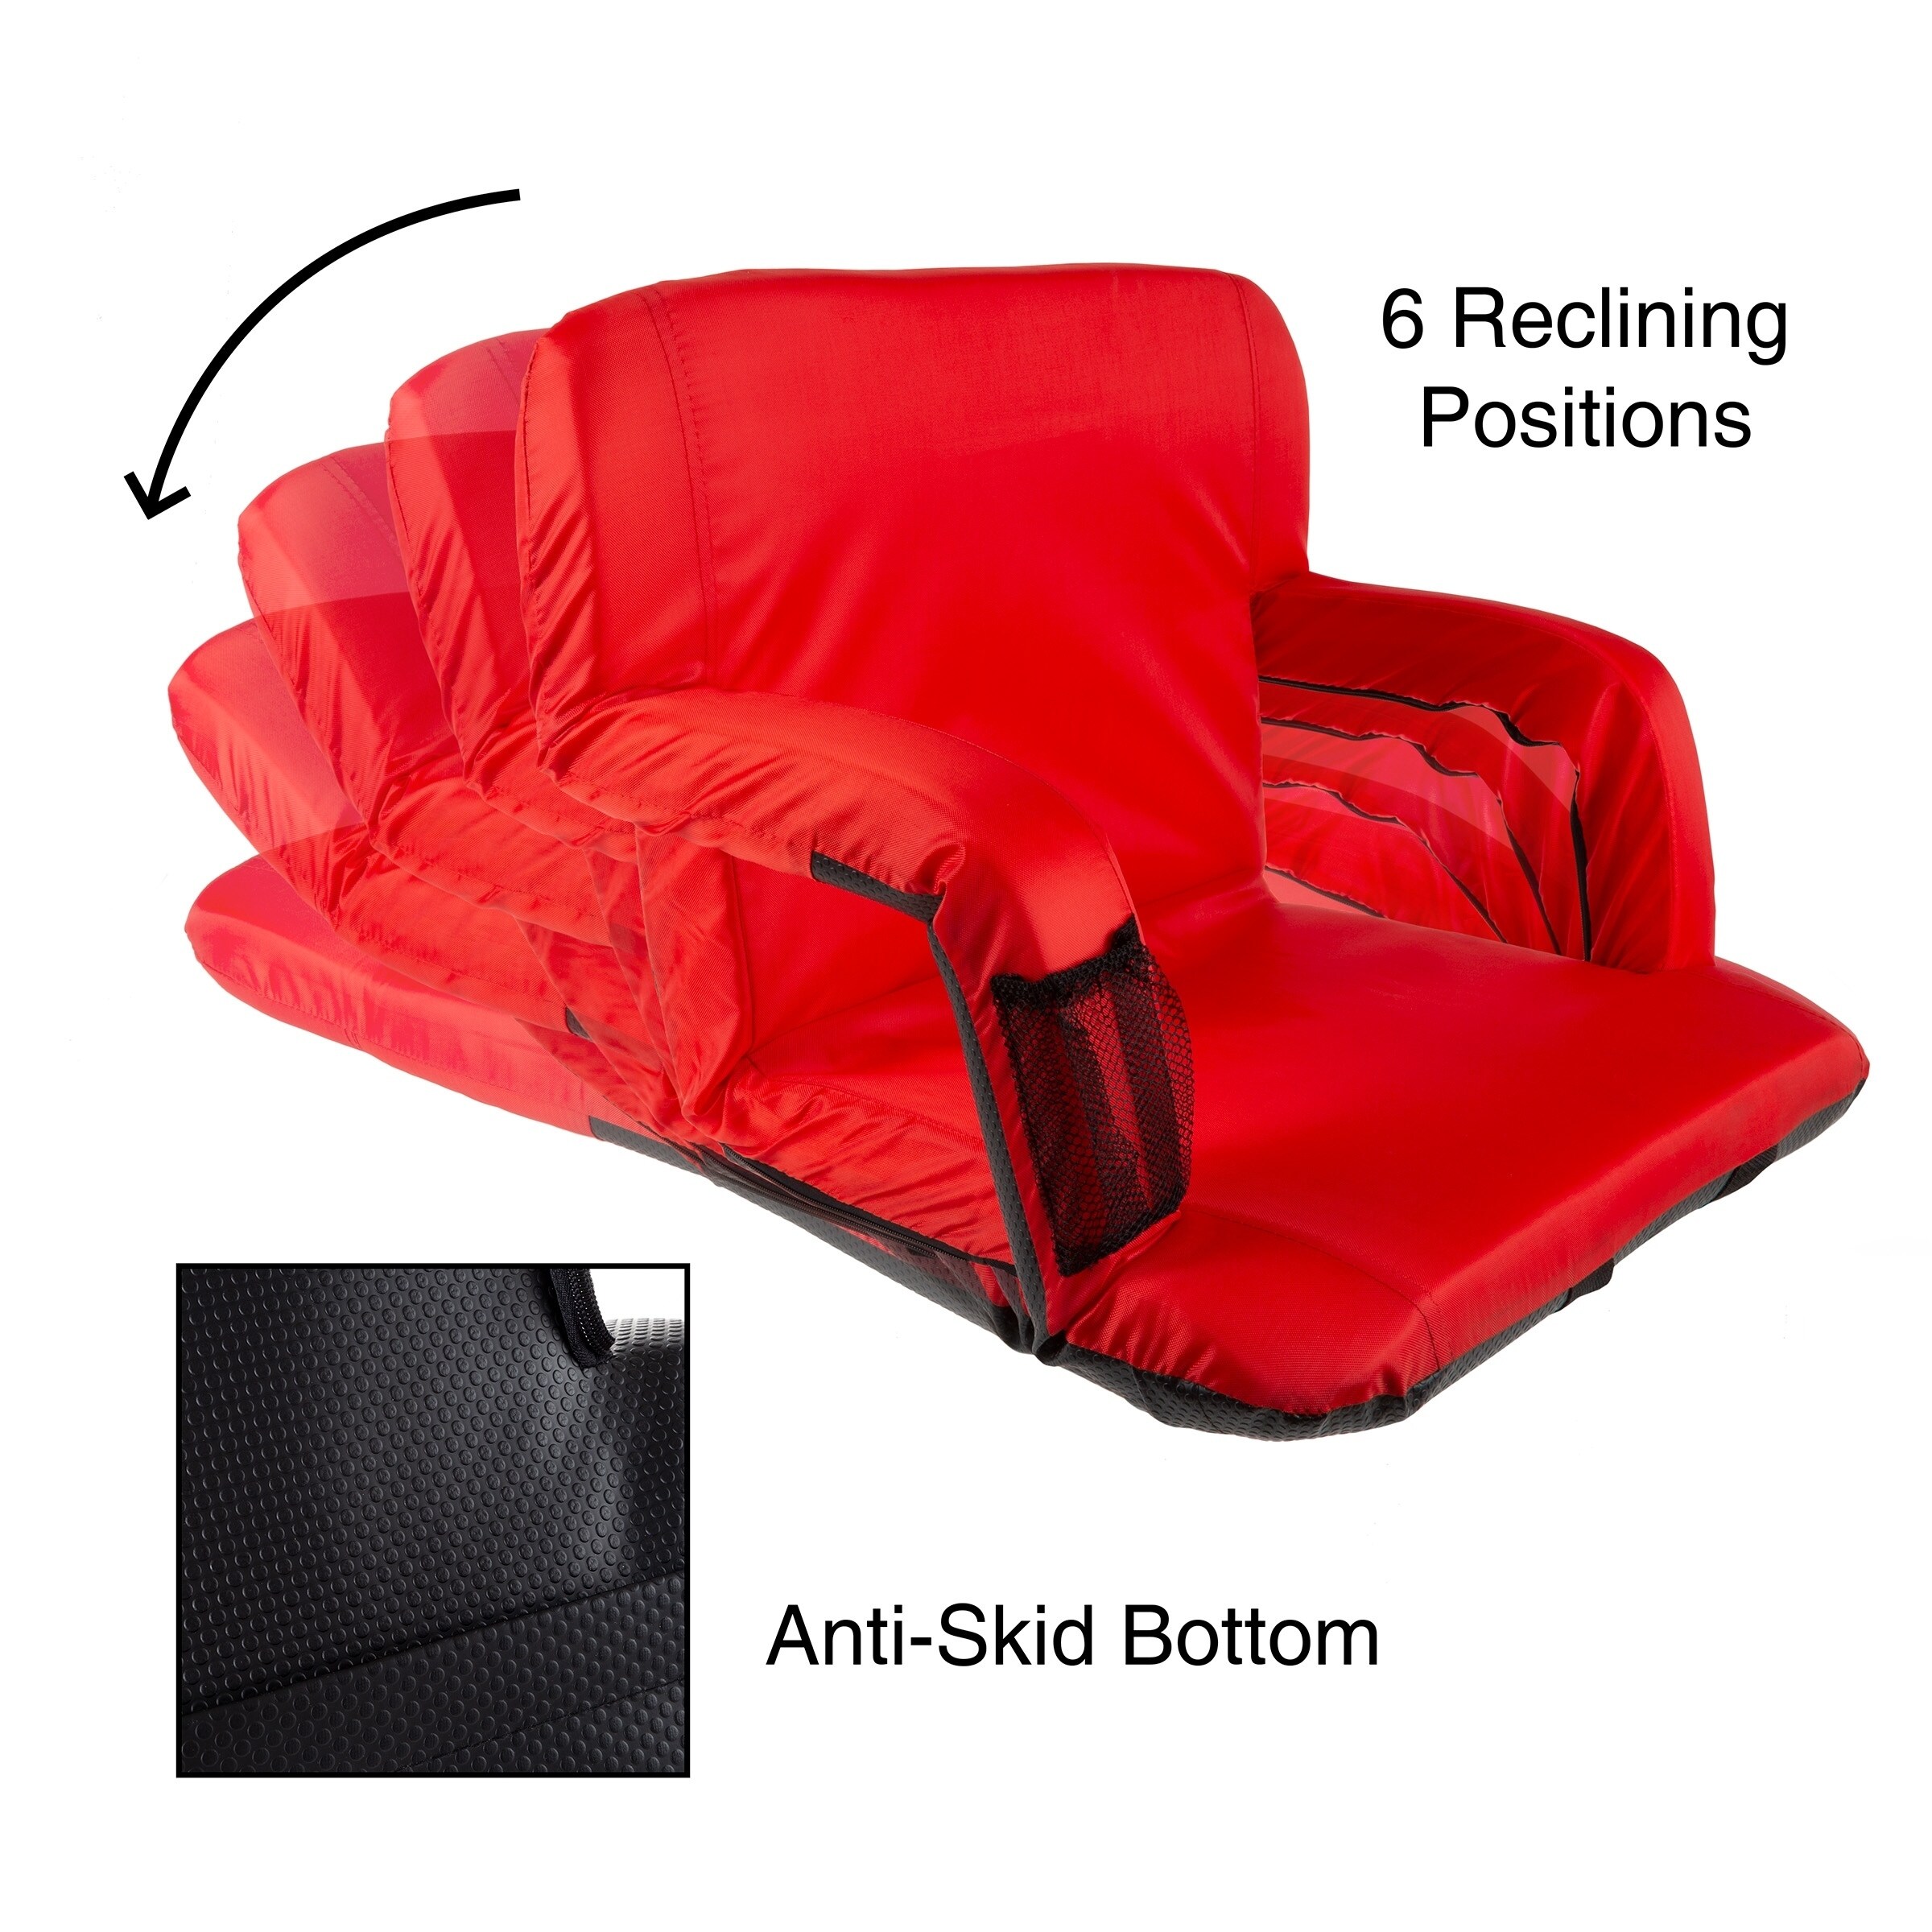 https://ak1.ostkcdn.com/images/products/24232575/Wide-Stadium-Seat-Cushion-6-Reclining-Positions-by-Home-Complete-ecab27c0-ded3-457d-bac9-b218c42ee966.jpg